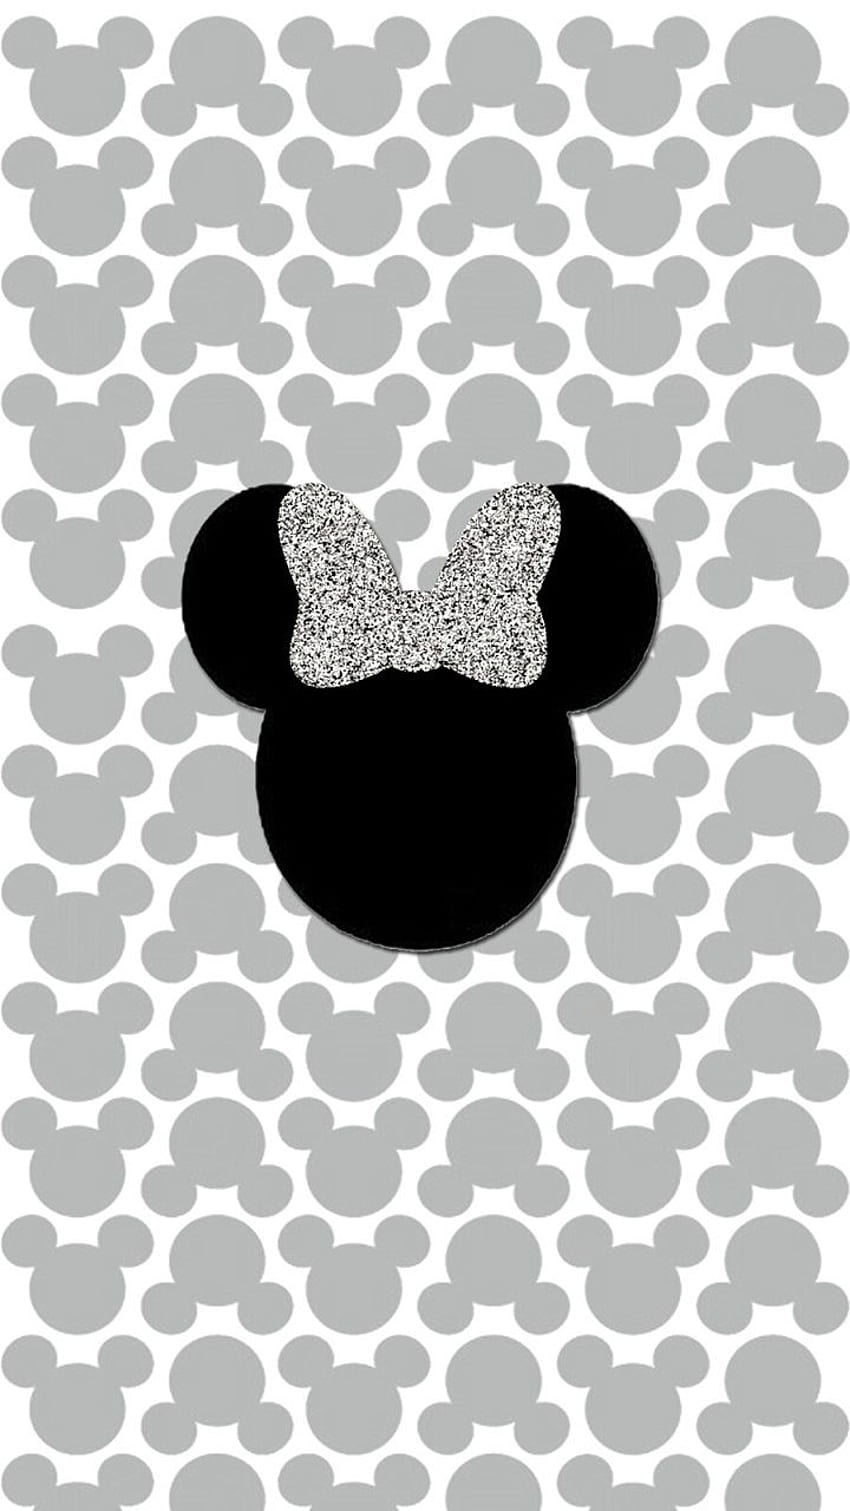 Discover 65+ background minnie mouse wallpaper latest - in.cdgdbentre